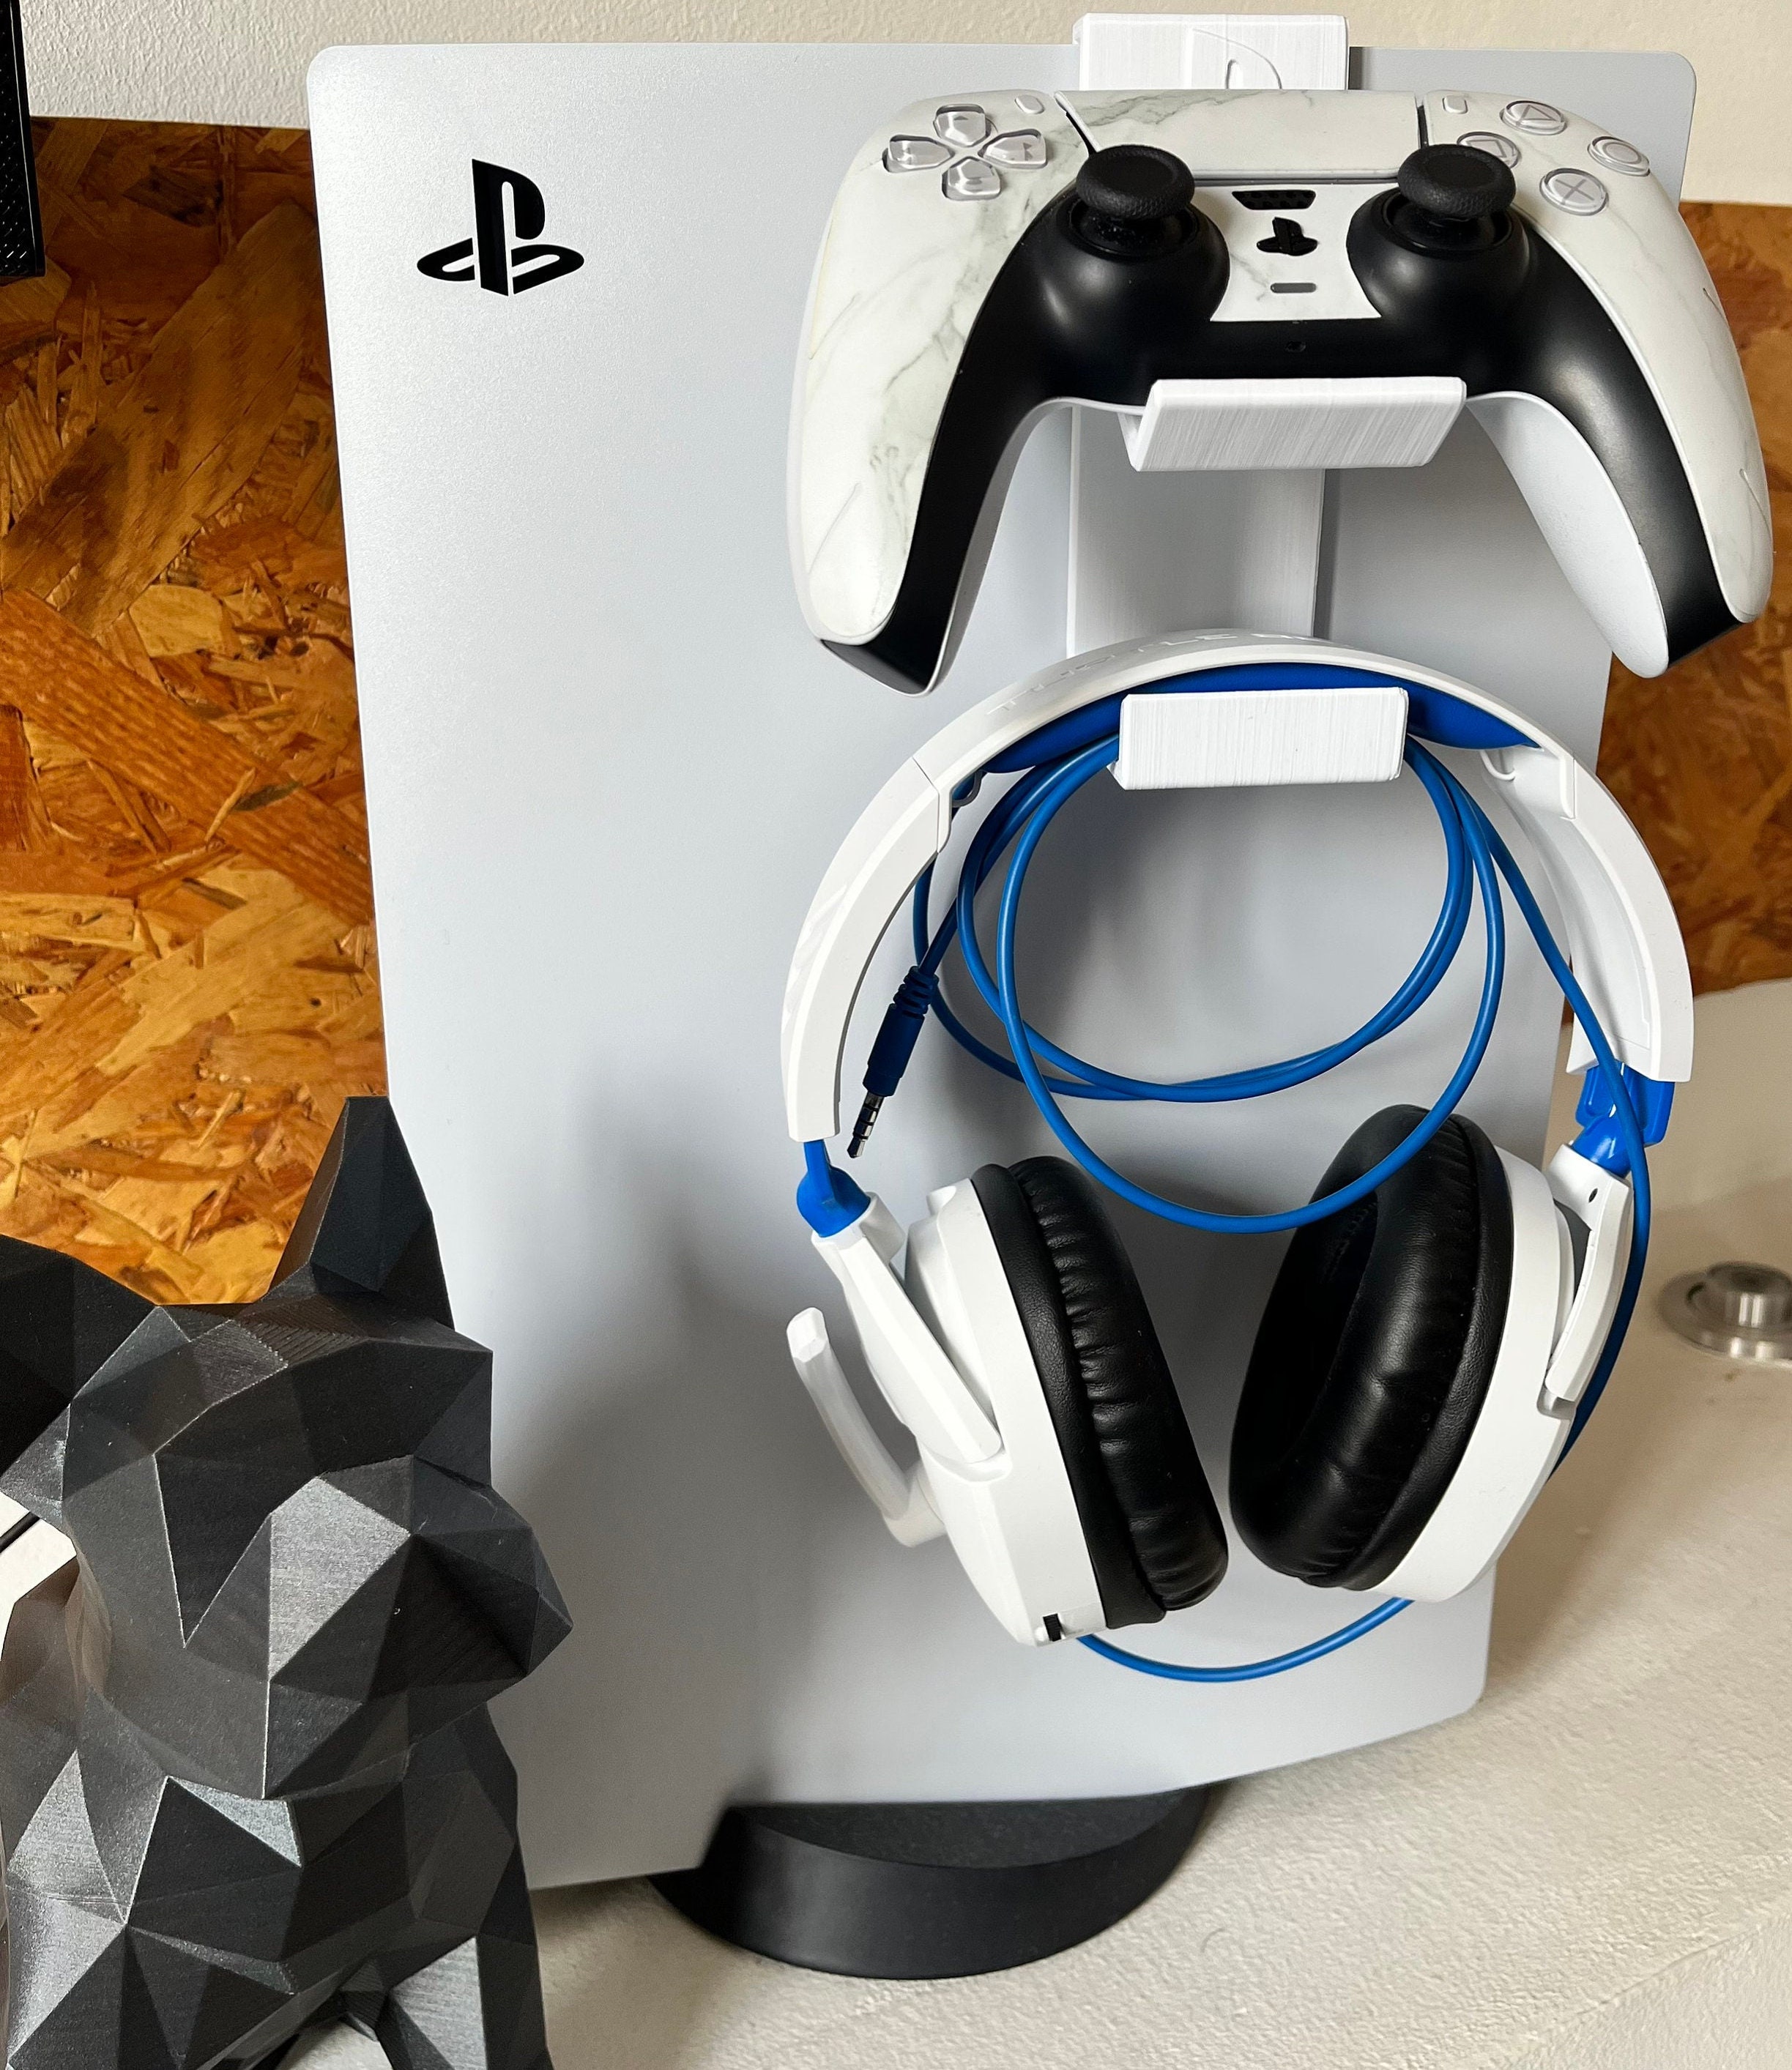 Support Casque Pulse 3D PS5